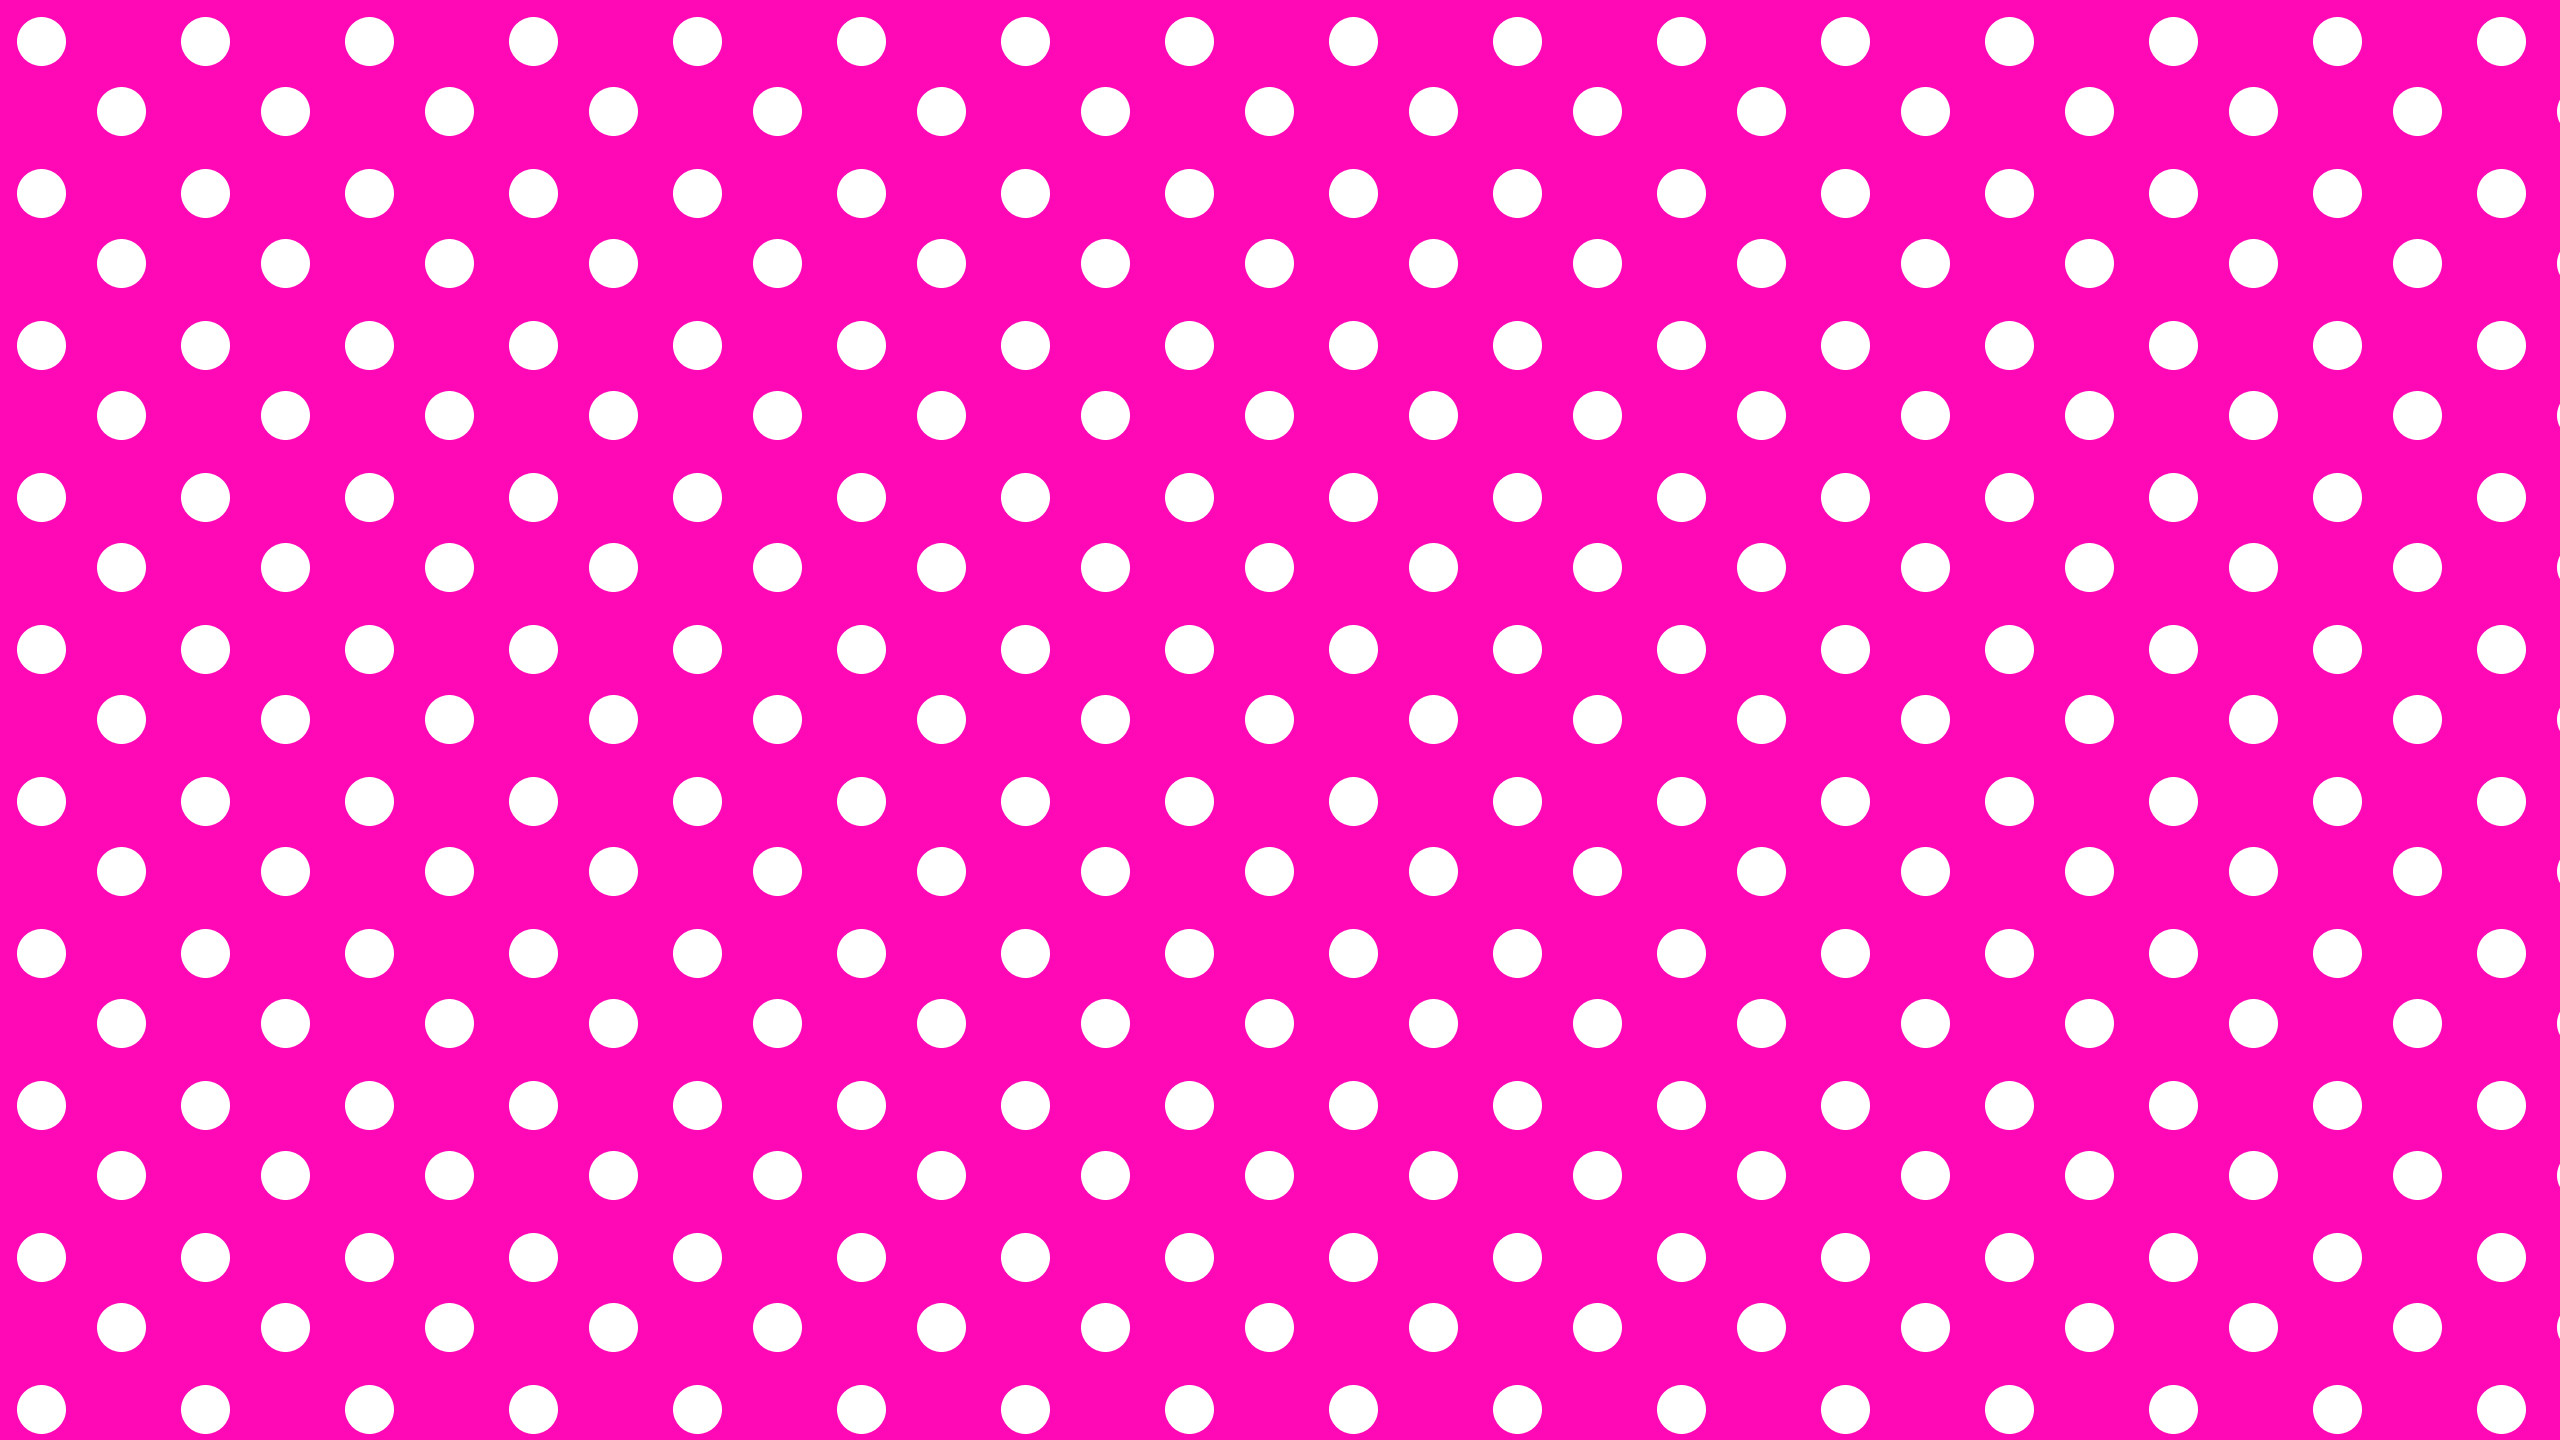 Pink Polka Dot Wallpaper Images Hot Sex Picture